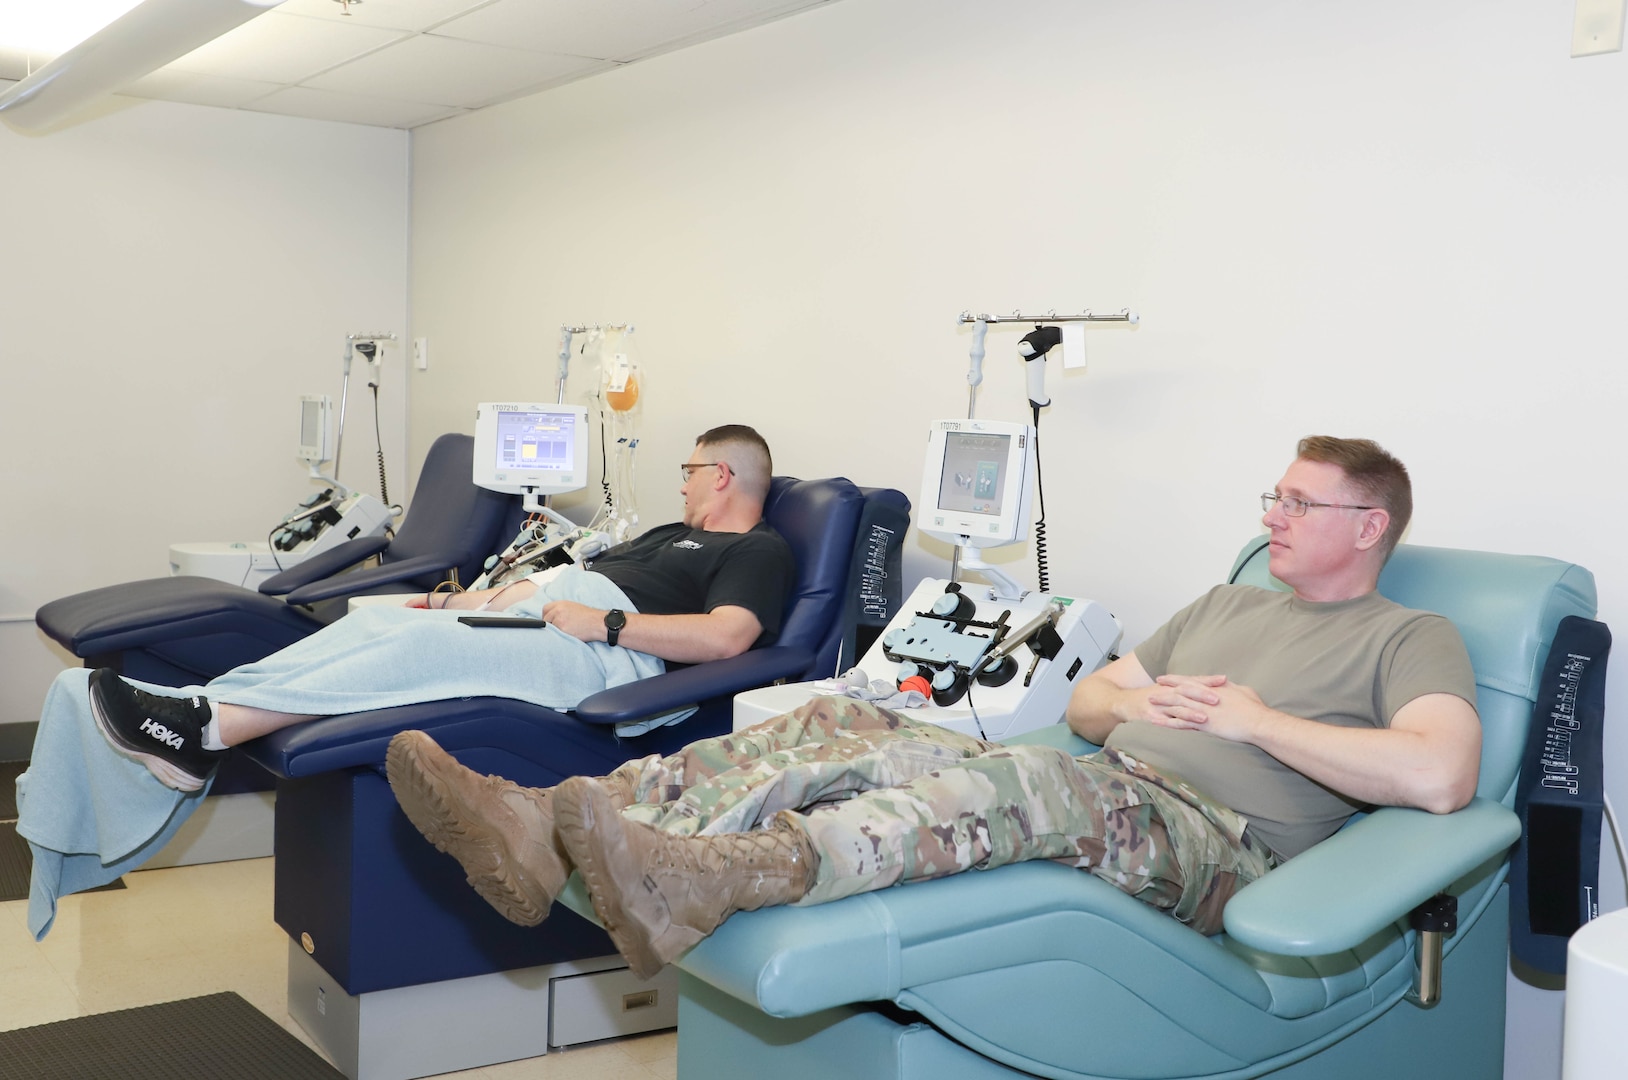 U.S. Army Brandon R. Ecker with U.S. Army Corps of Engineers, Schofield Barracks and U.S. Army Lt. Col. Kevin J. Downing with Tripler Army Medical Center donates blood and plasma units to Tripler Army Medical Center Blood Donor Center on Jan. 8, 2024.